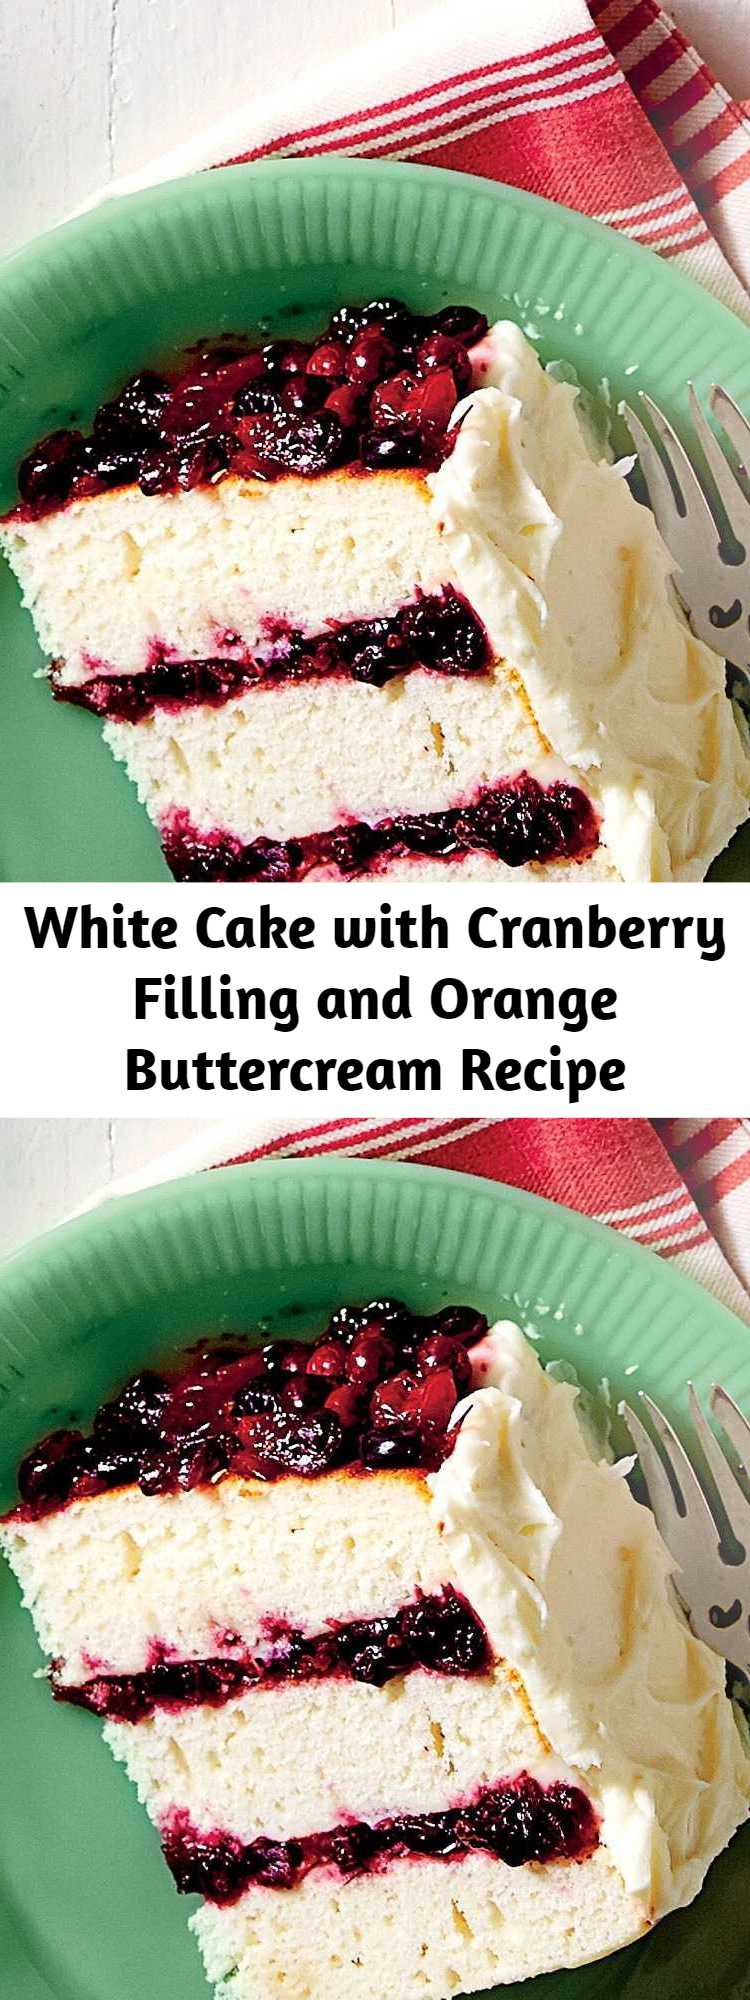 White Cake with Cranberry Filling and Orange Buttercream Recipe - This melt-in-your-mouth cake will be the star of your holiday meal. Your guests will be begging for the recipe!